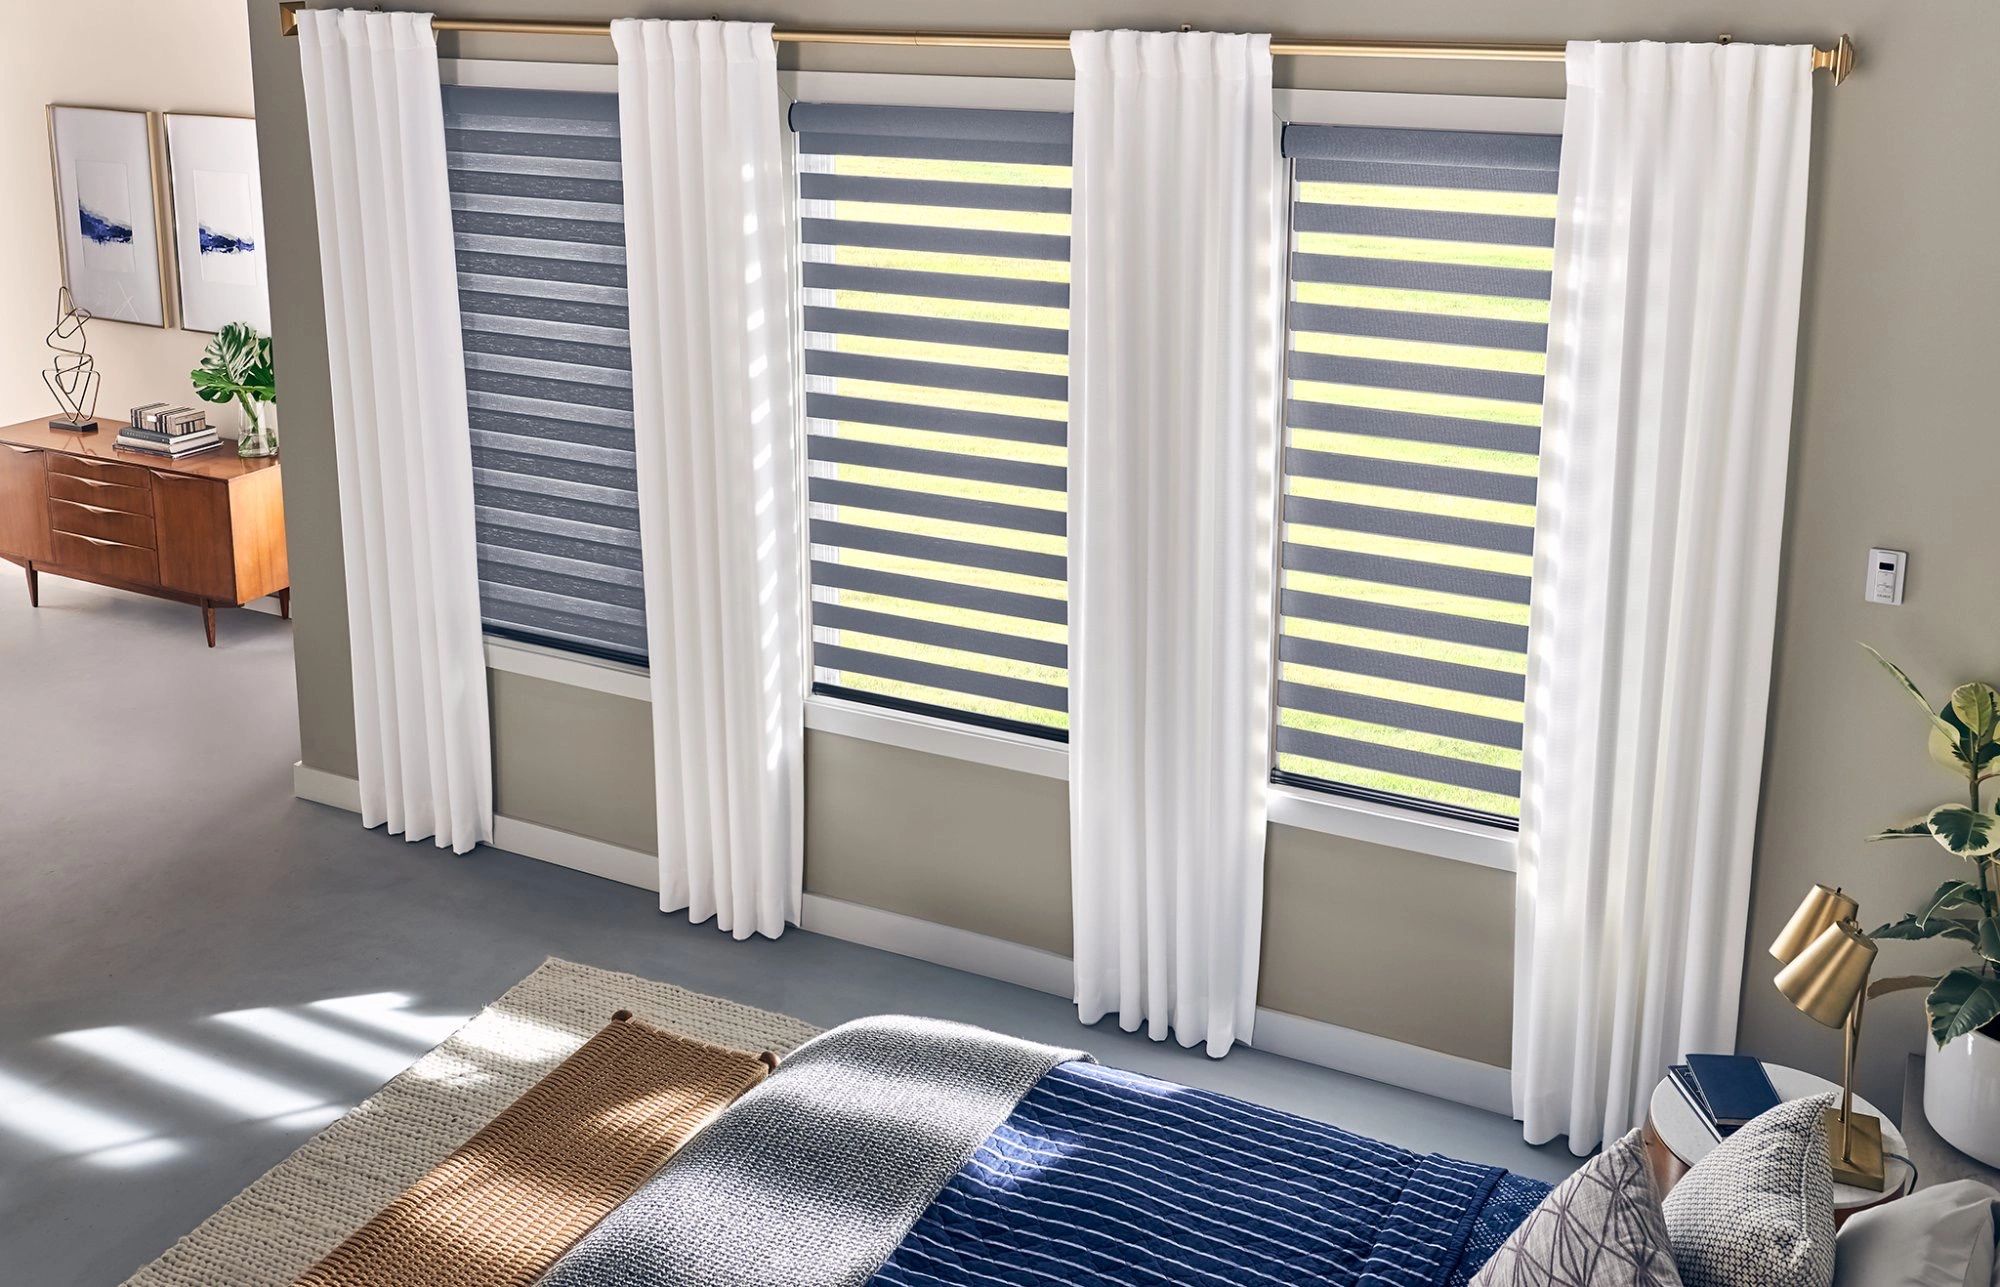 Banded/ Striped Shades matched with curtains